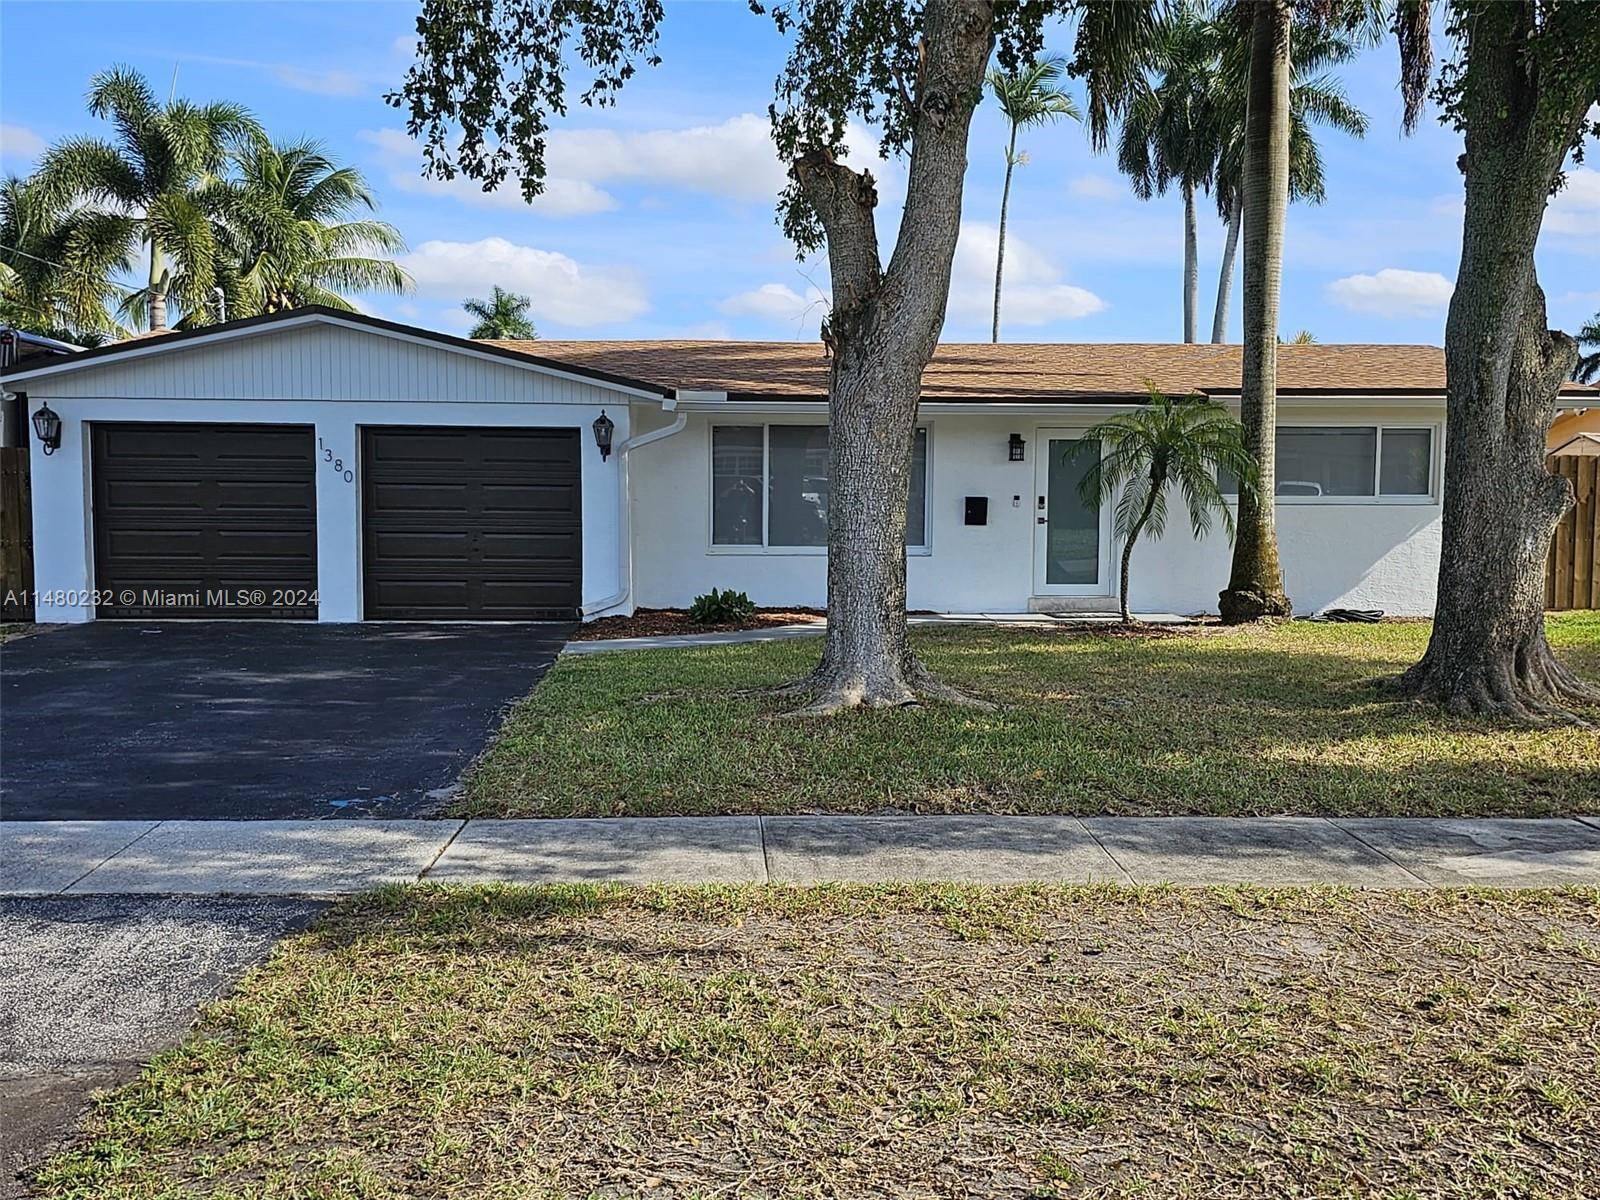 Make this house your home, 3 Bed 2 bath located in Plantation Isles a hidden gem with old world charm boaters paradise with ocean access.